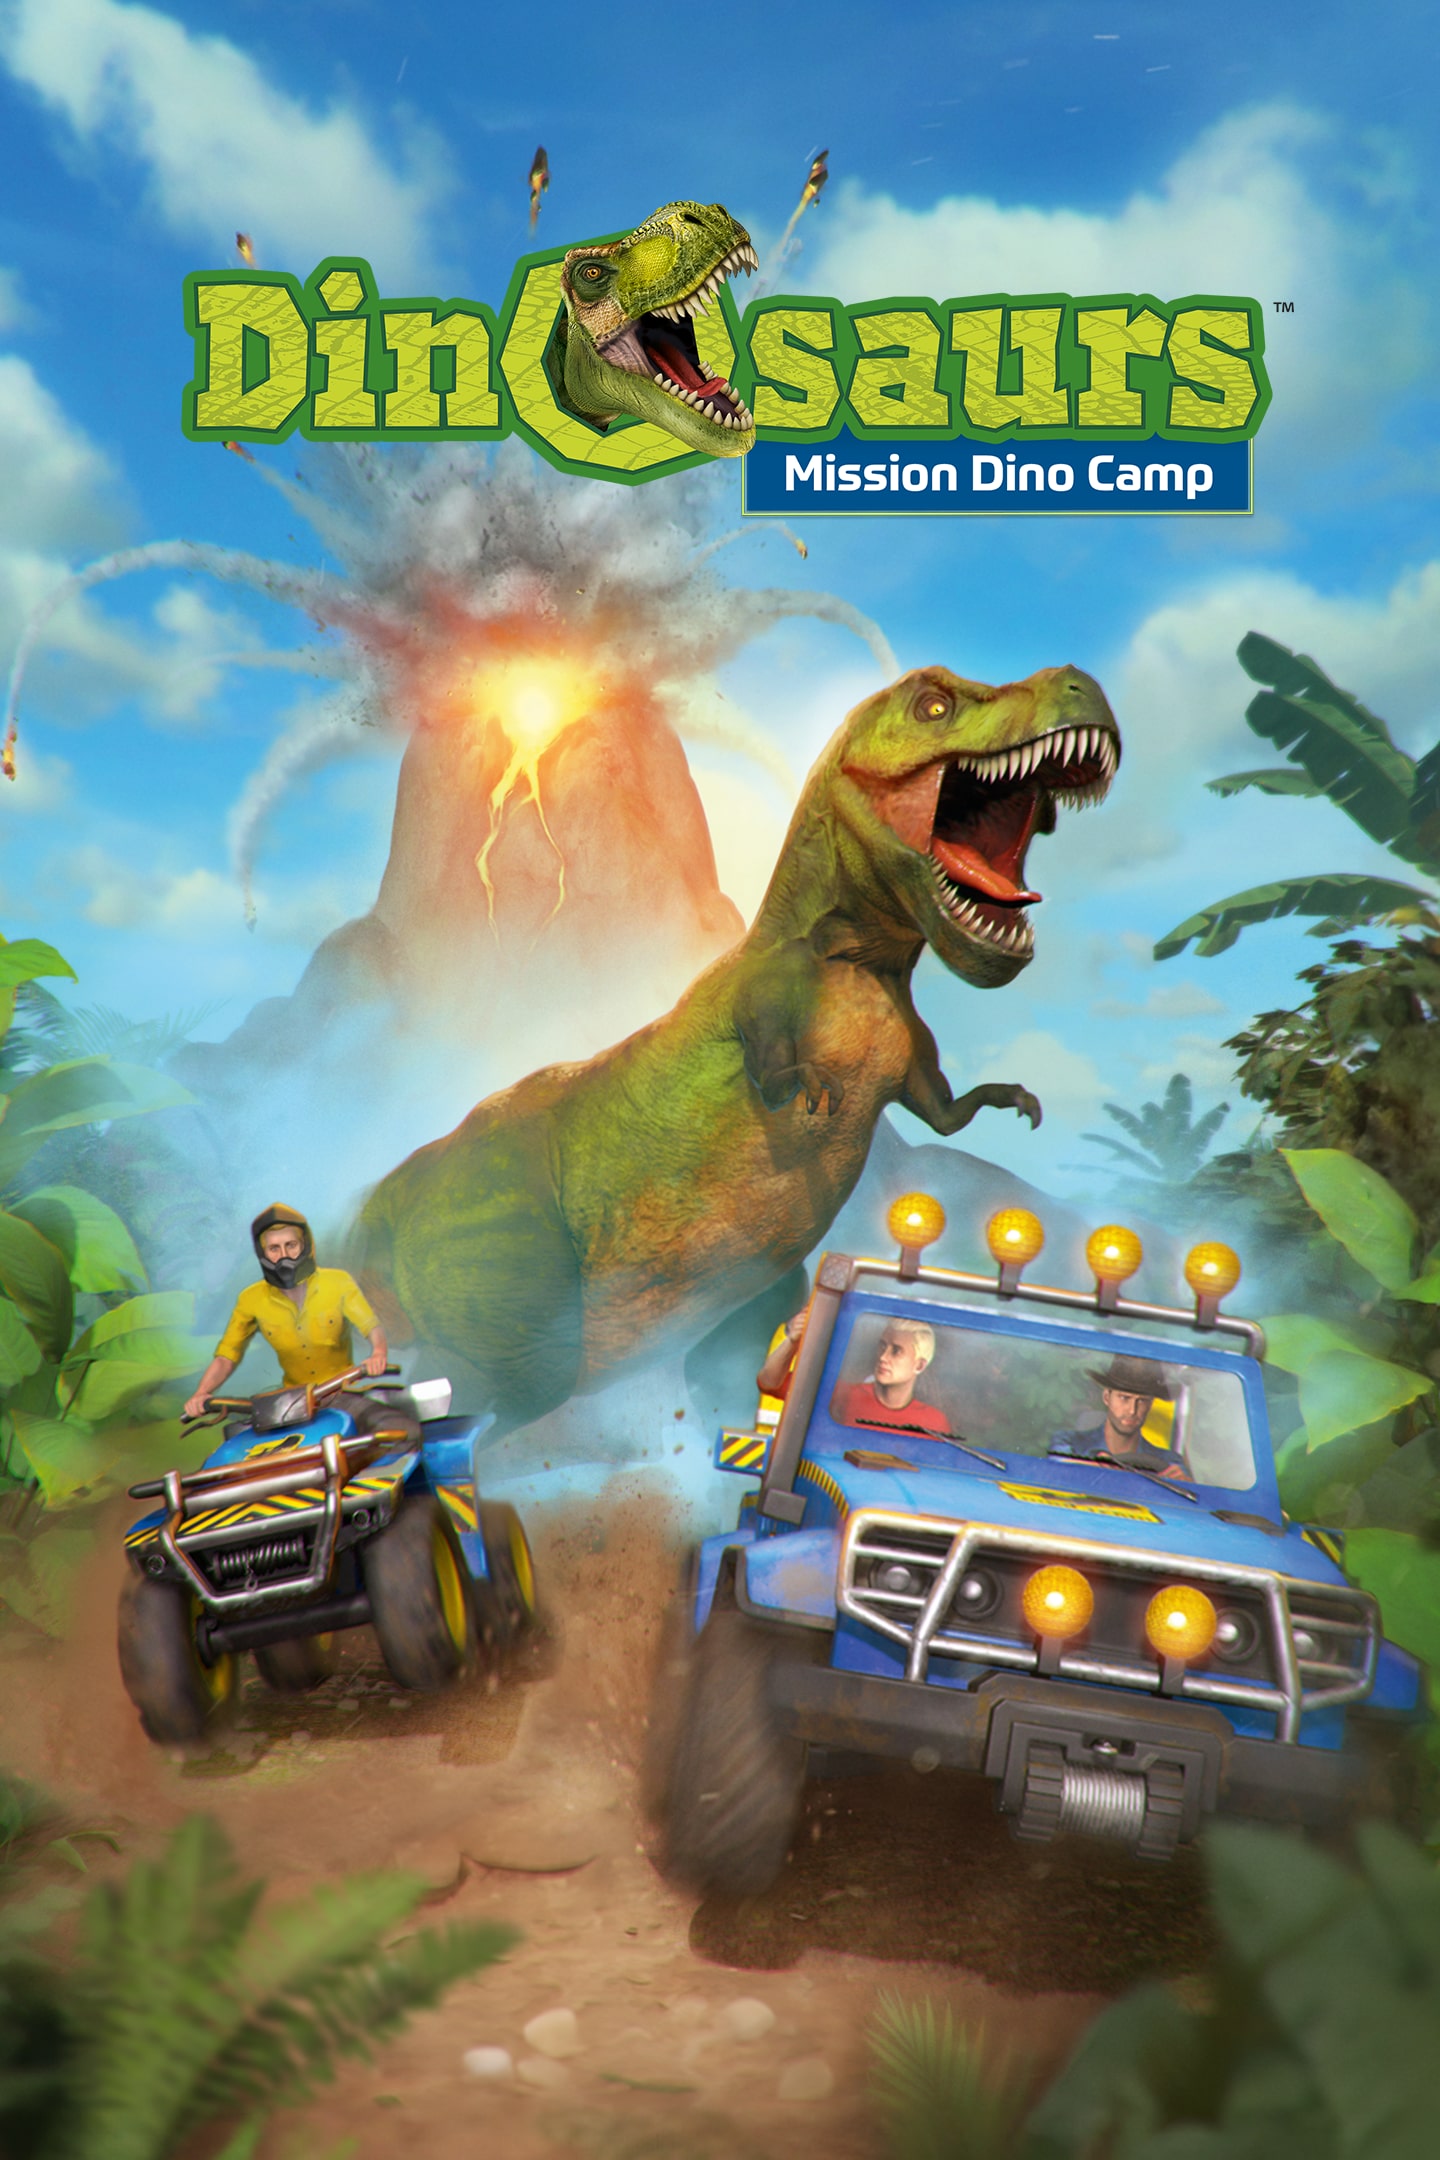 Dinosaurs Mission Dino Camp - PS5